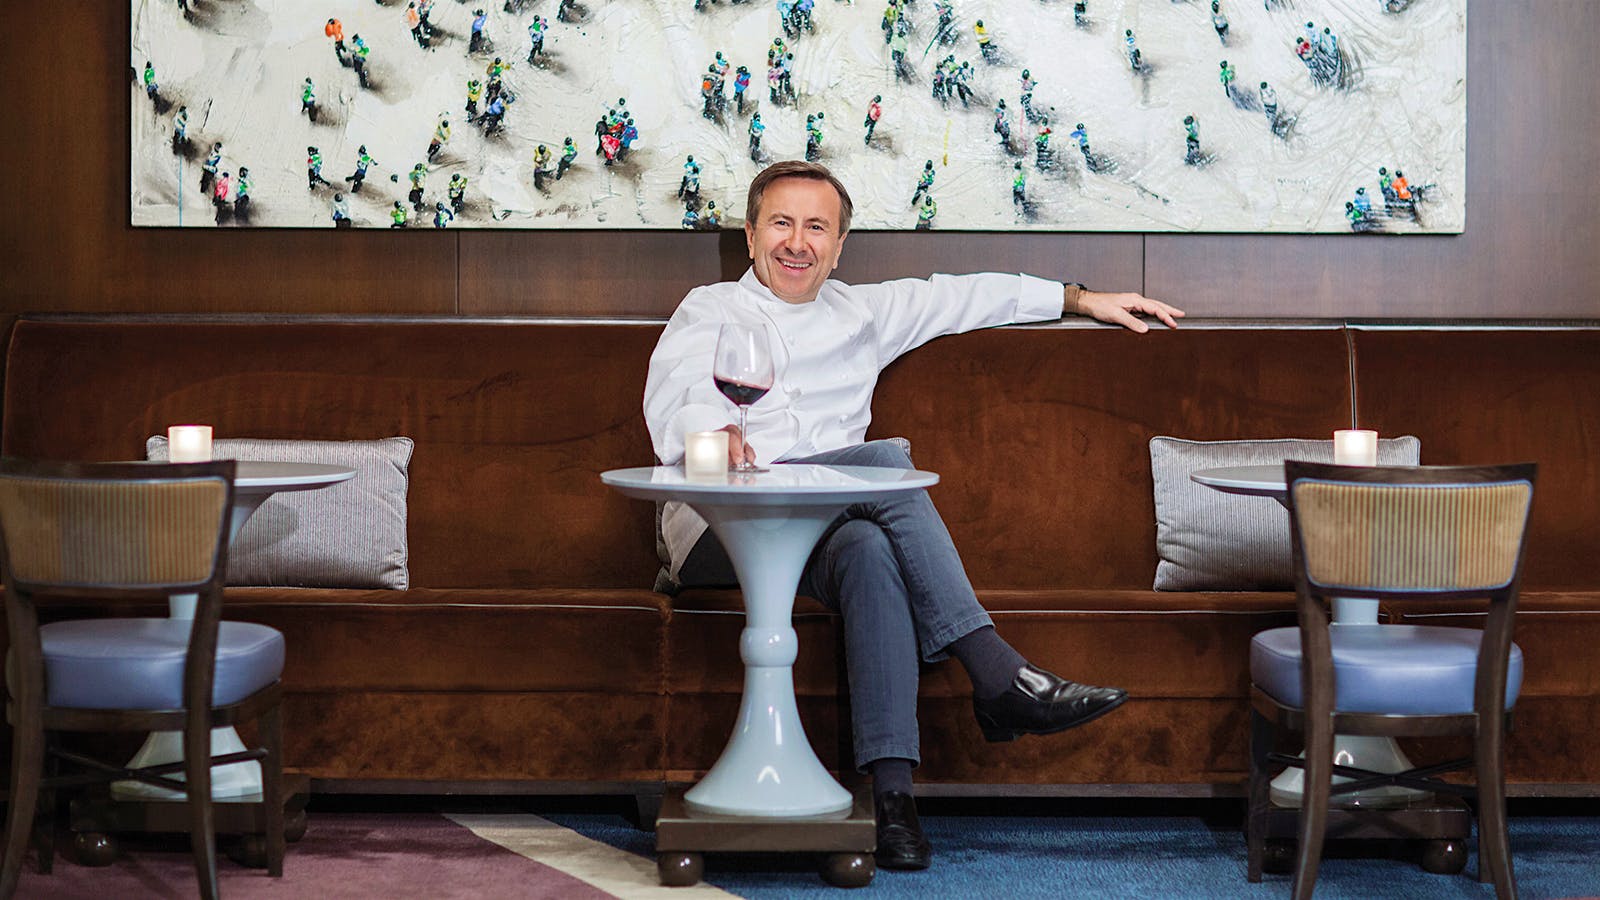 Chef Daniel Boulud at a table in his restaurant with a glass of wine